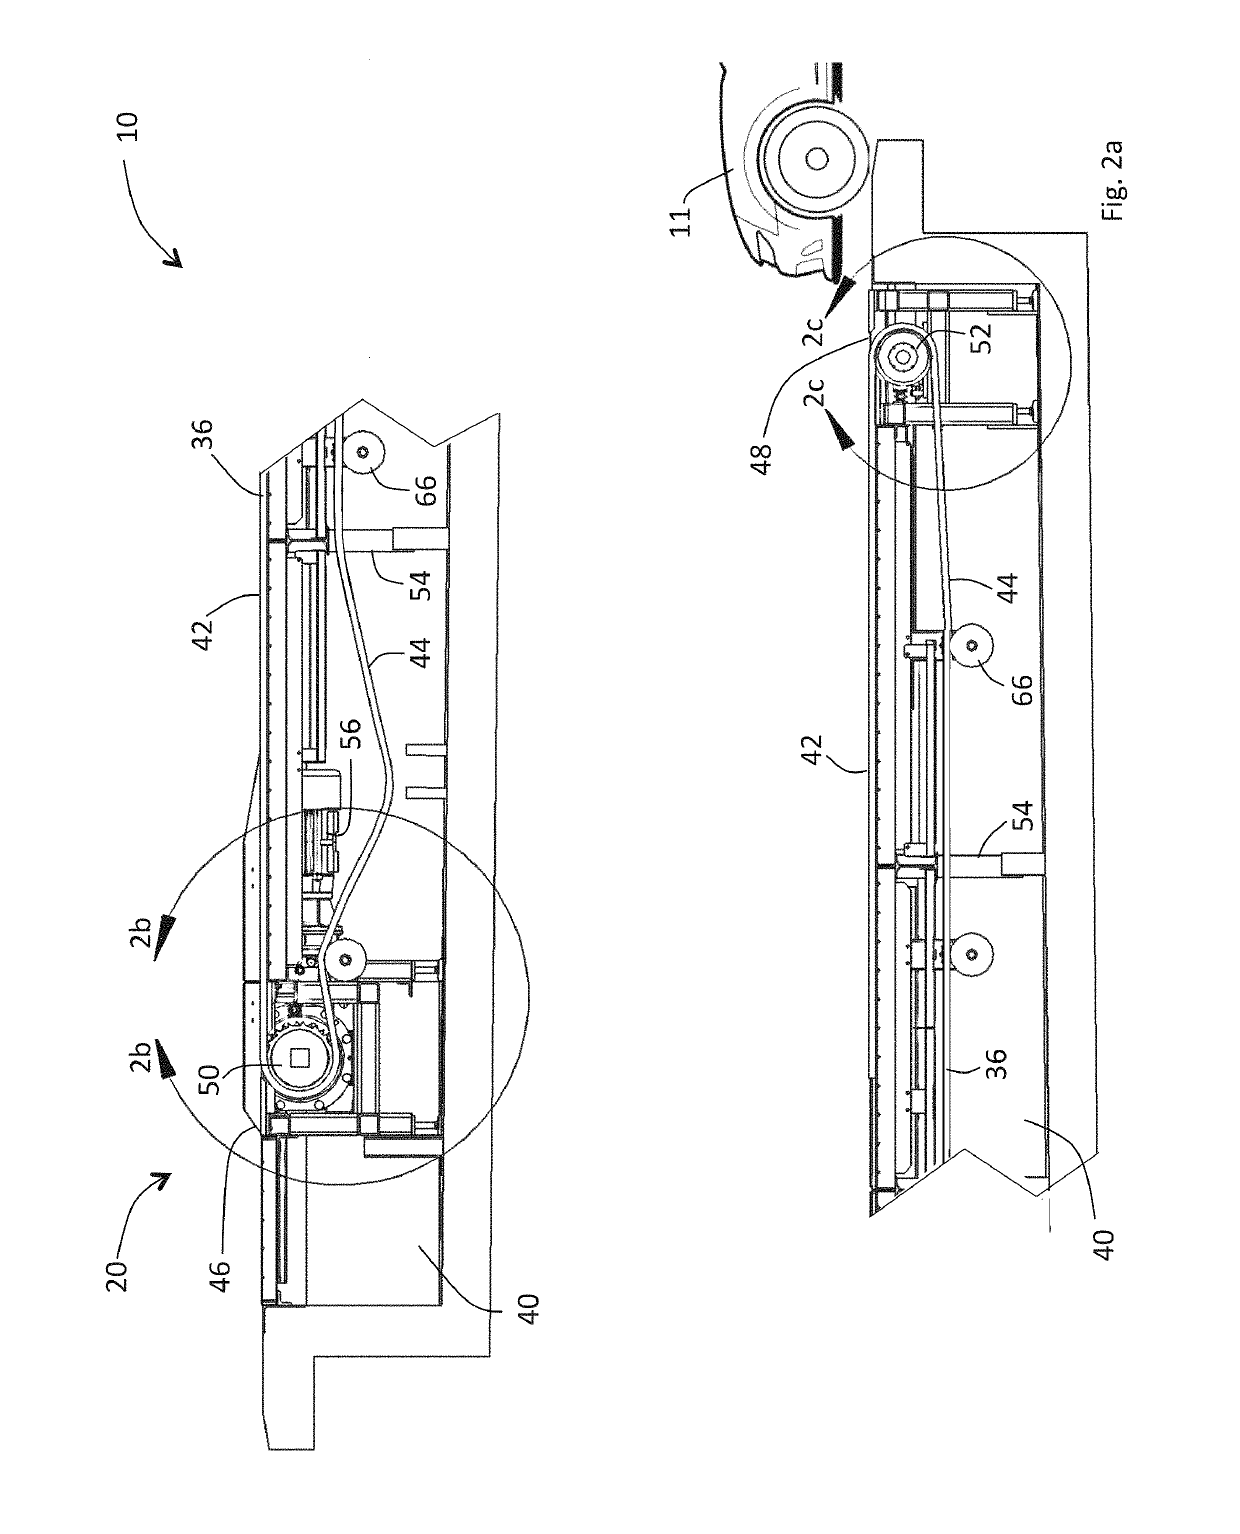 Belt contact surface with inserts, and a conveyor system using same